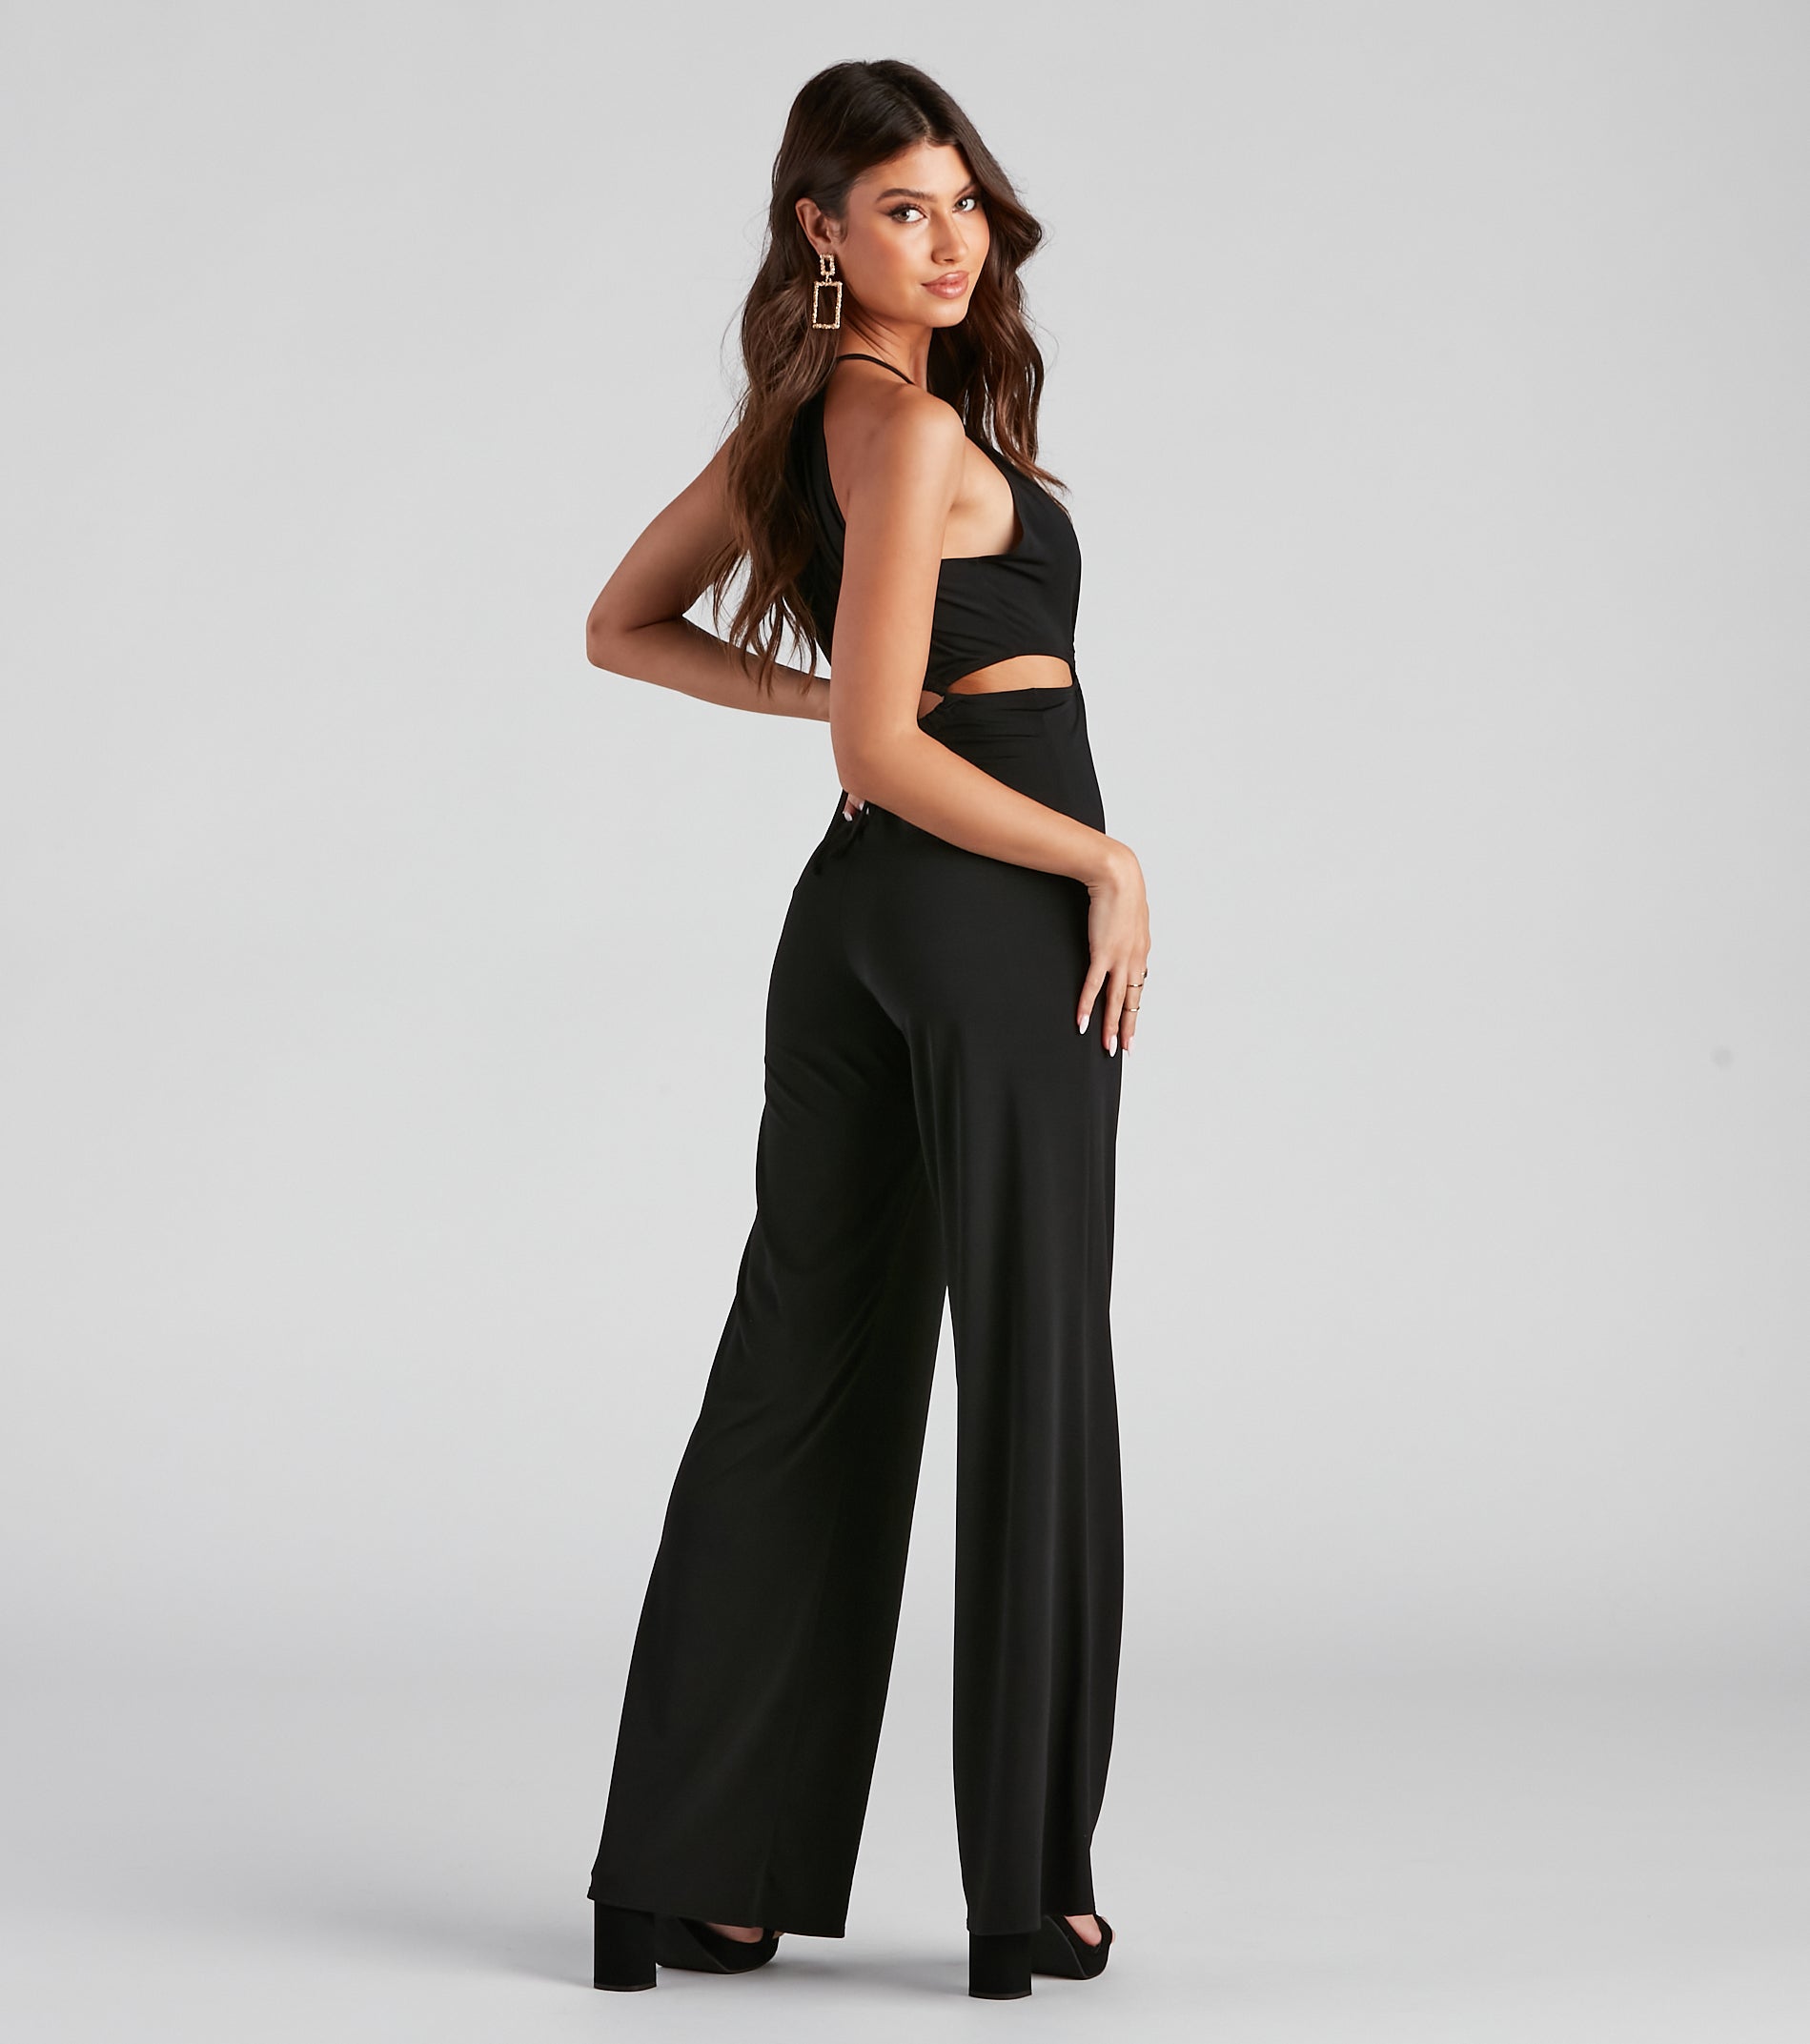 The Spot To Go Halter Jumpsuit